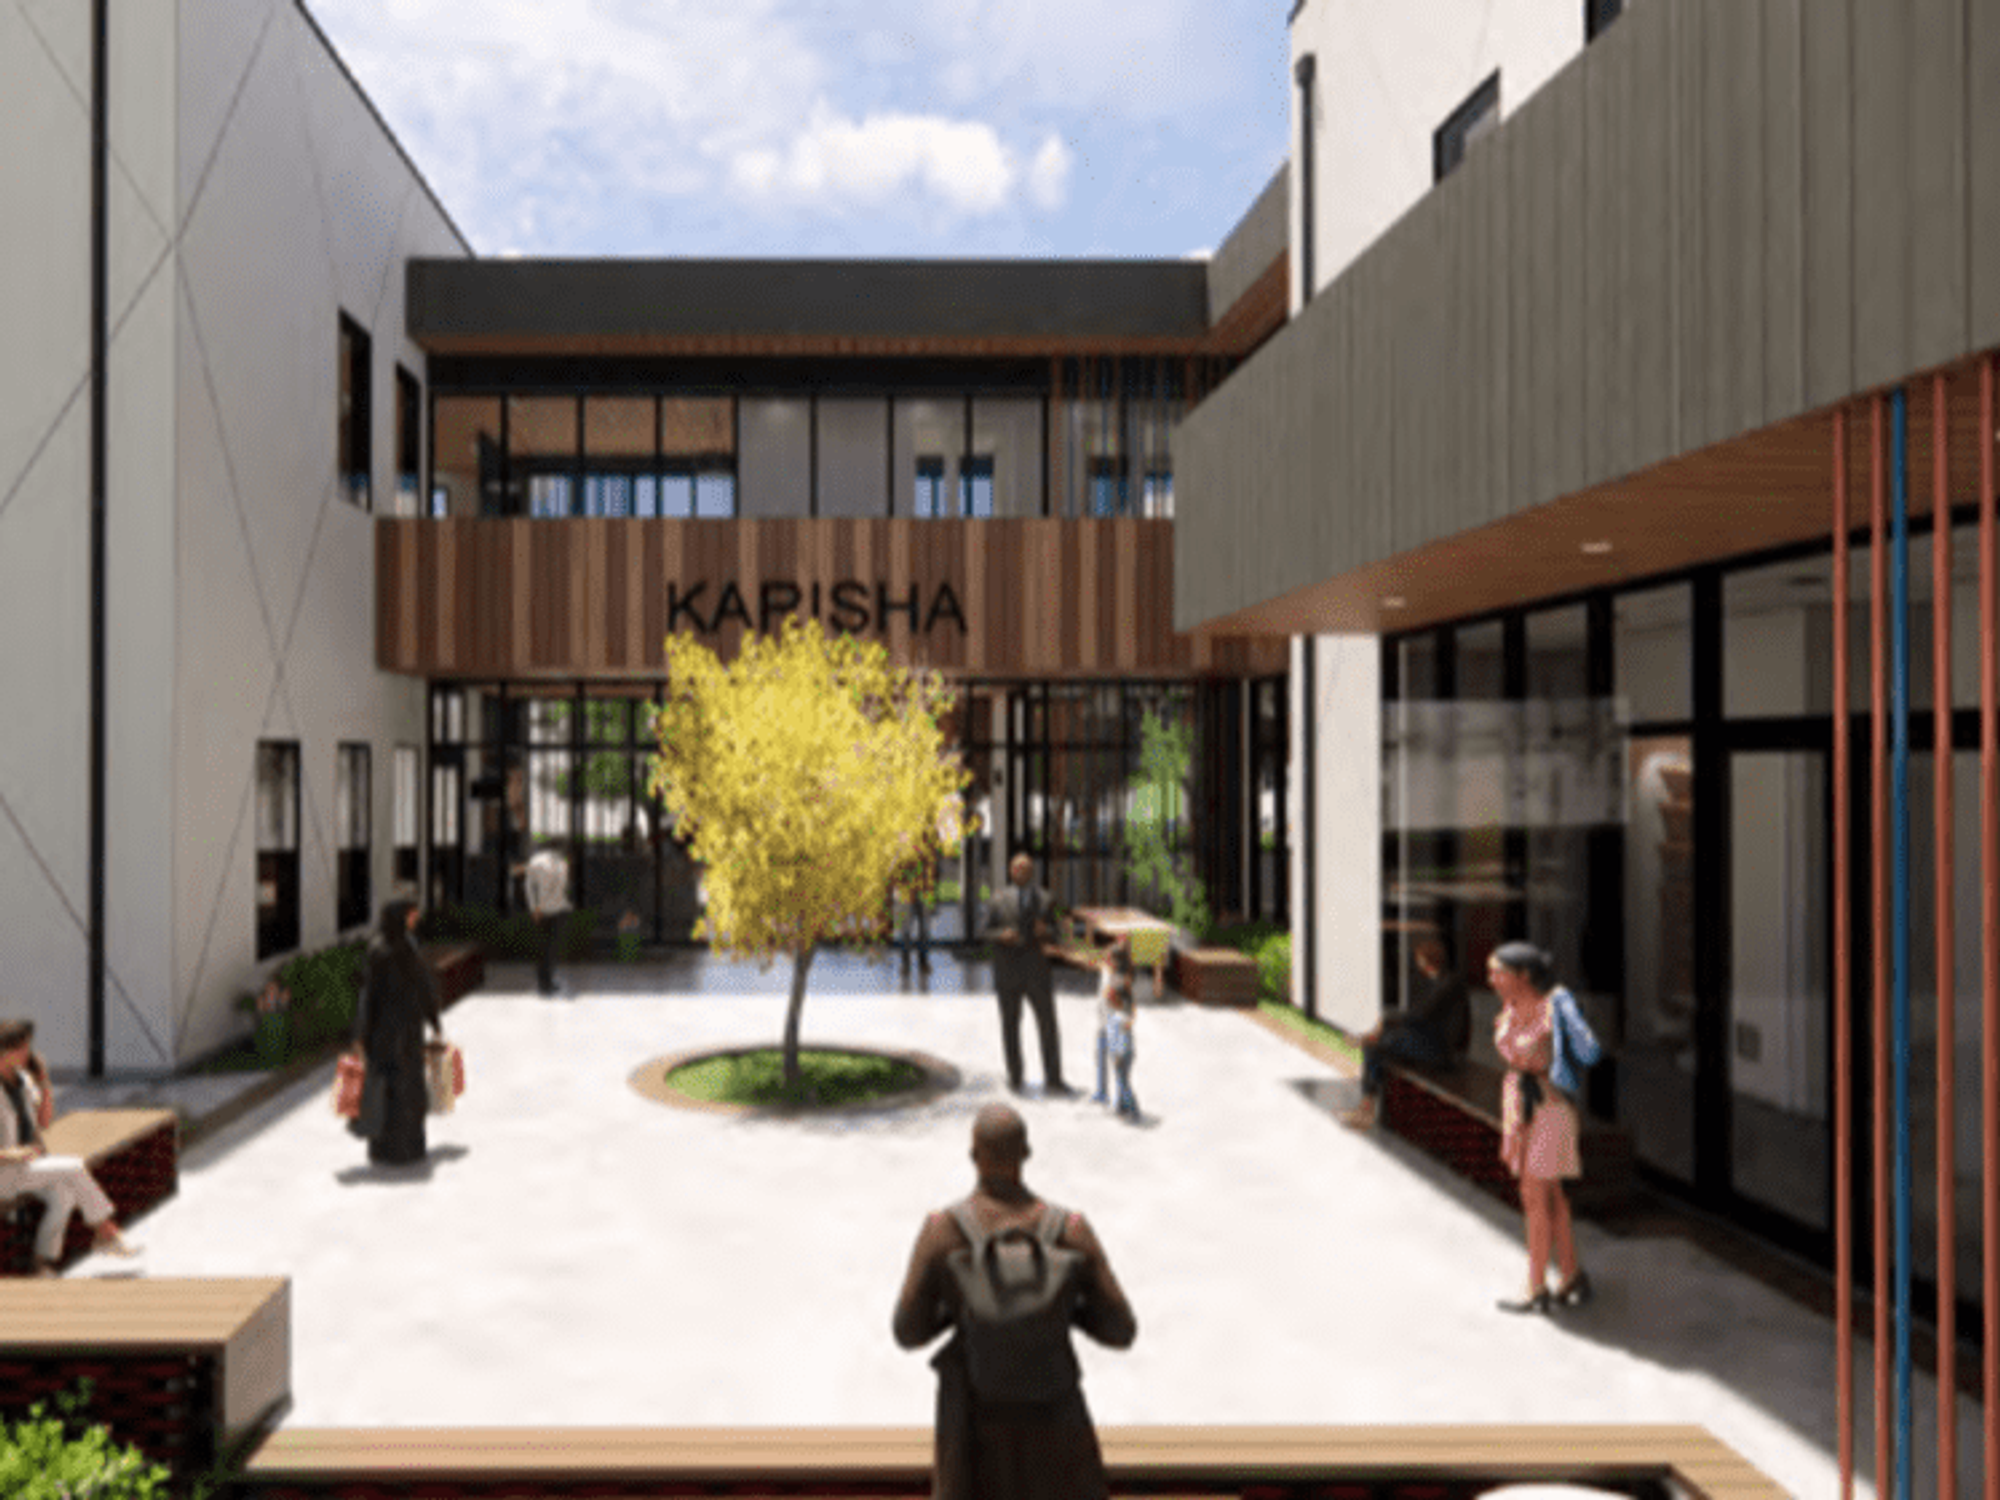 A rendering of the Karisha campus: a concrete courtyard and a wood-paneled building, with a tree in the center and people walking through.